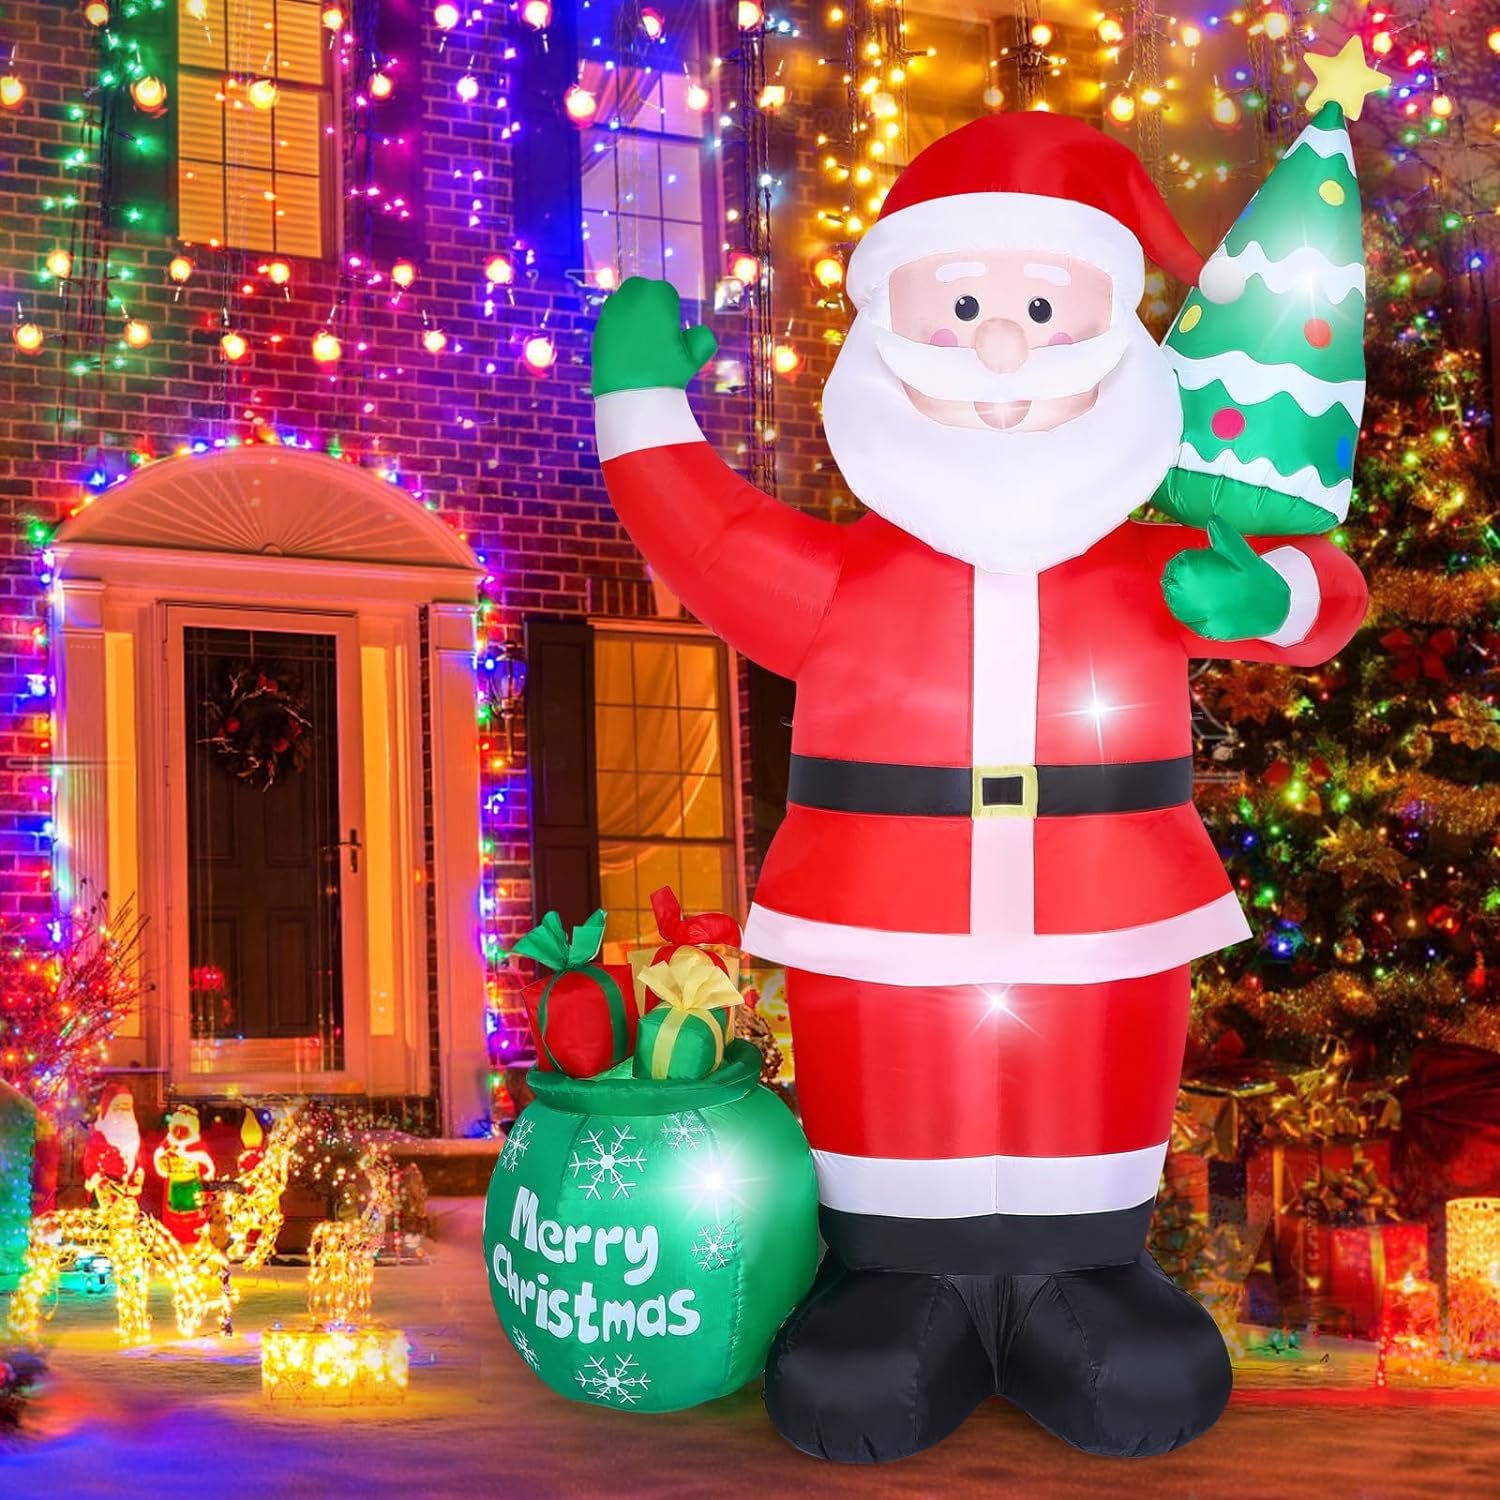 8 FT Christmas Inflatables Outdoor Decorations, Blow up Inflatable Santa Claus with LED Lights Gift Bag Christmas Tree for Xmas Decor Indoor Outside Yard Garden Patio Lawn Home Holiday Party